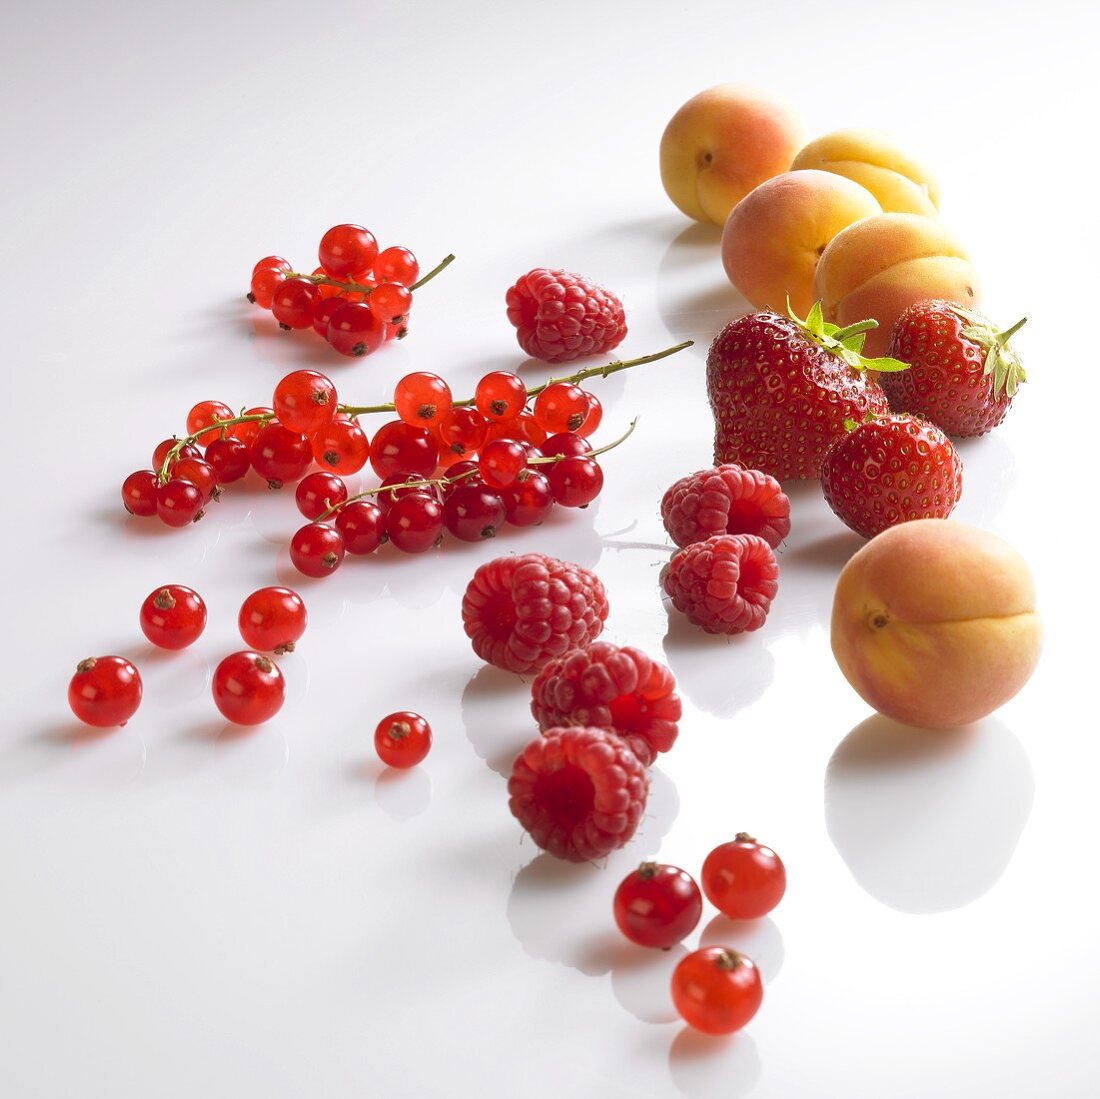 Red berries and apricots